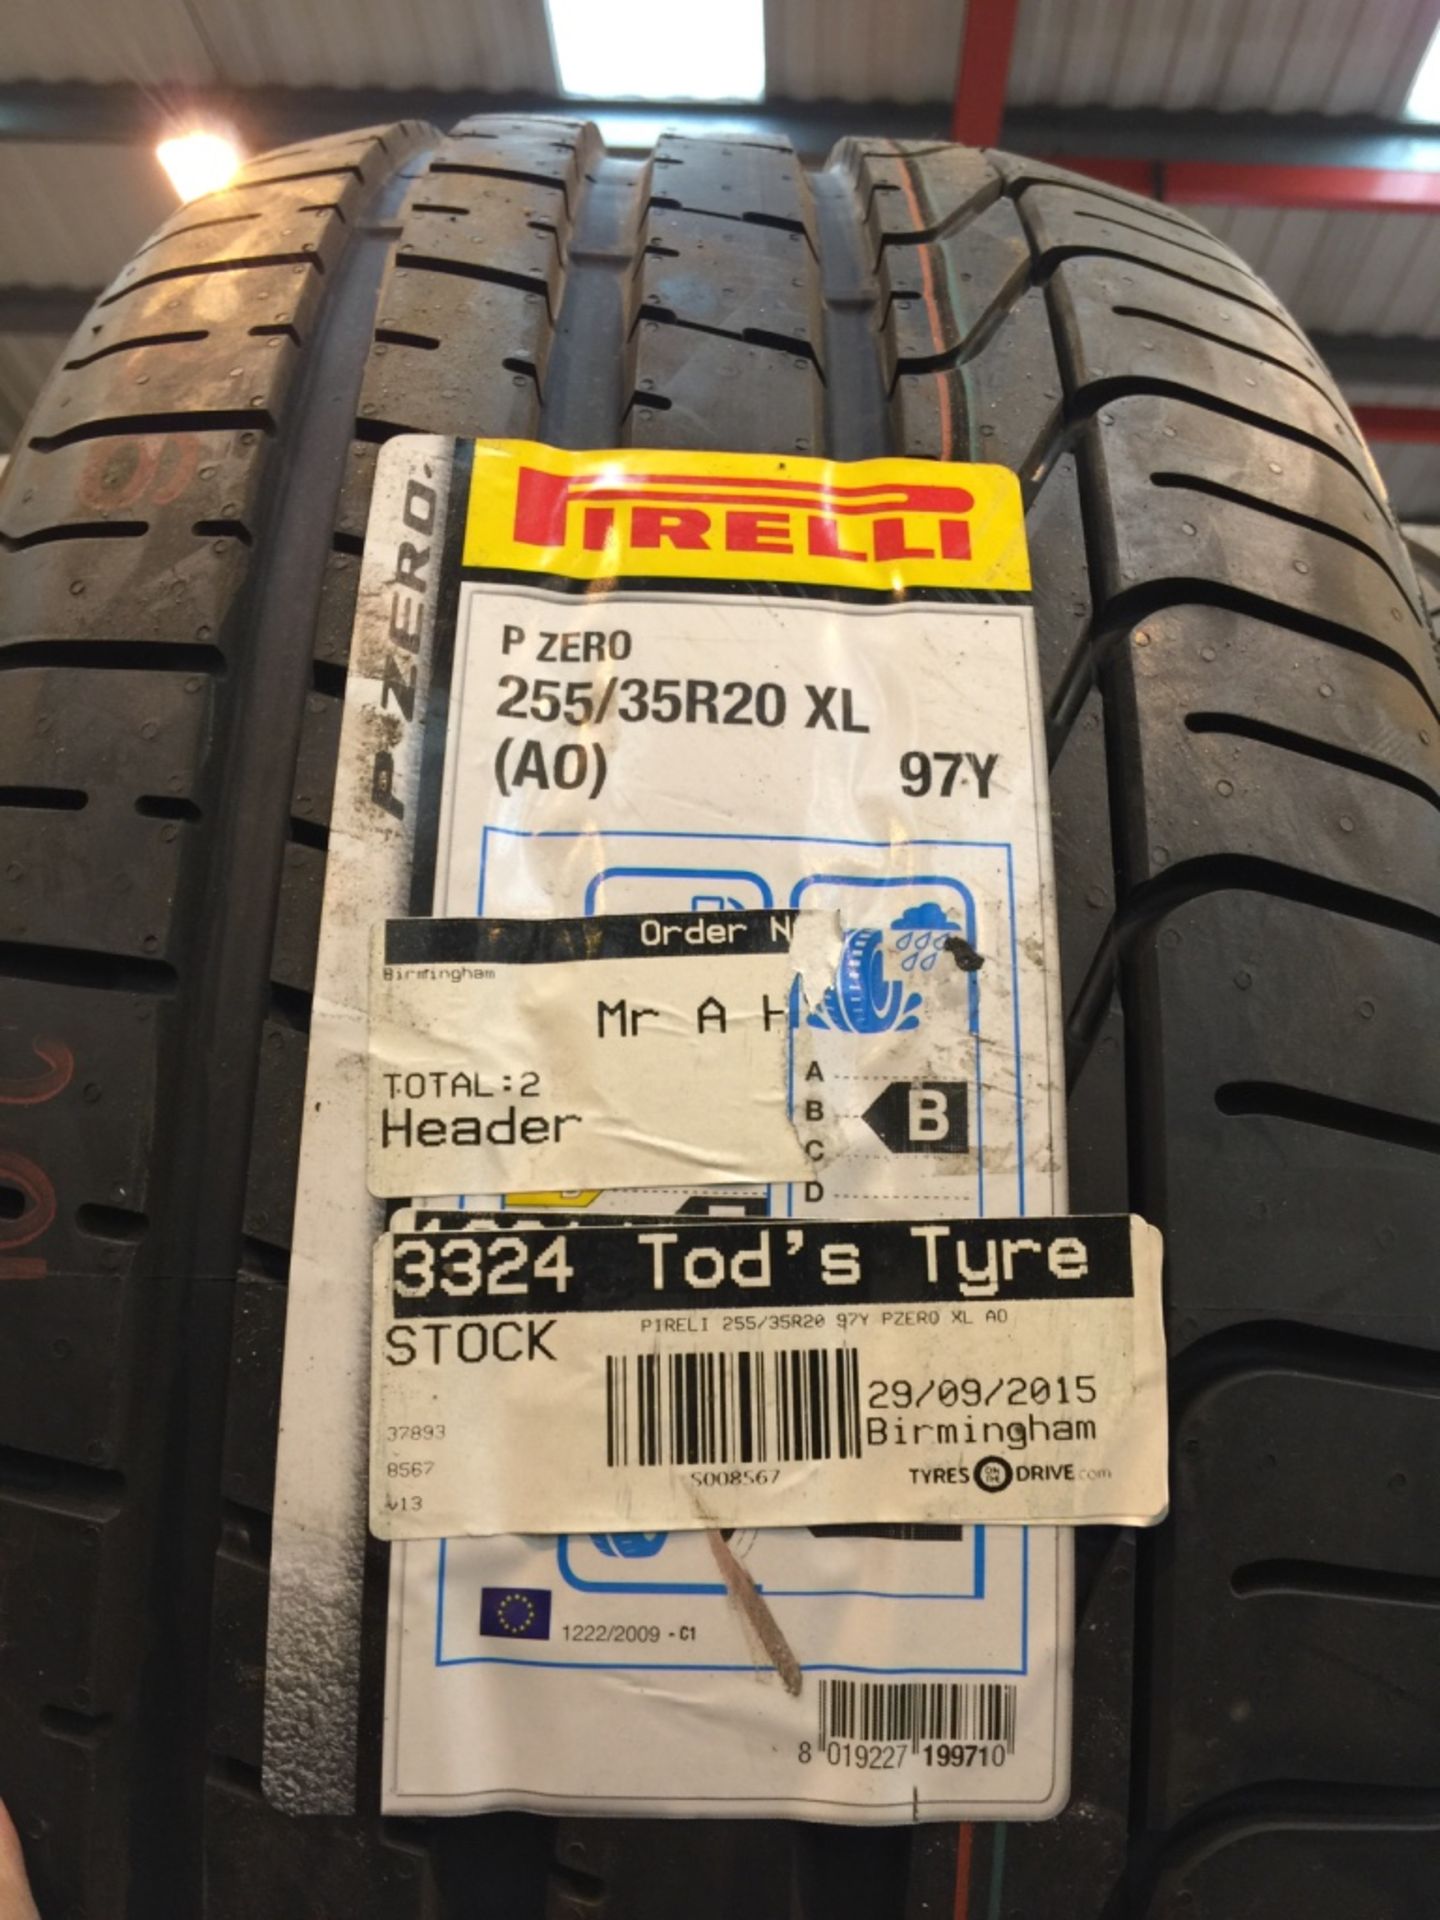 54: Pirelli Tyres Car & 4X4 - Many Large Sizes to include 18,19,21" Please see further Pictures ( - Image 23 of 55